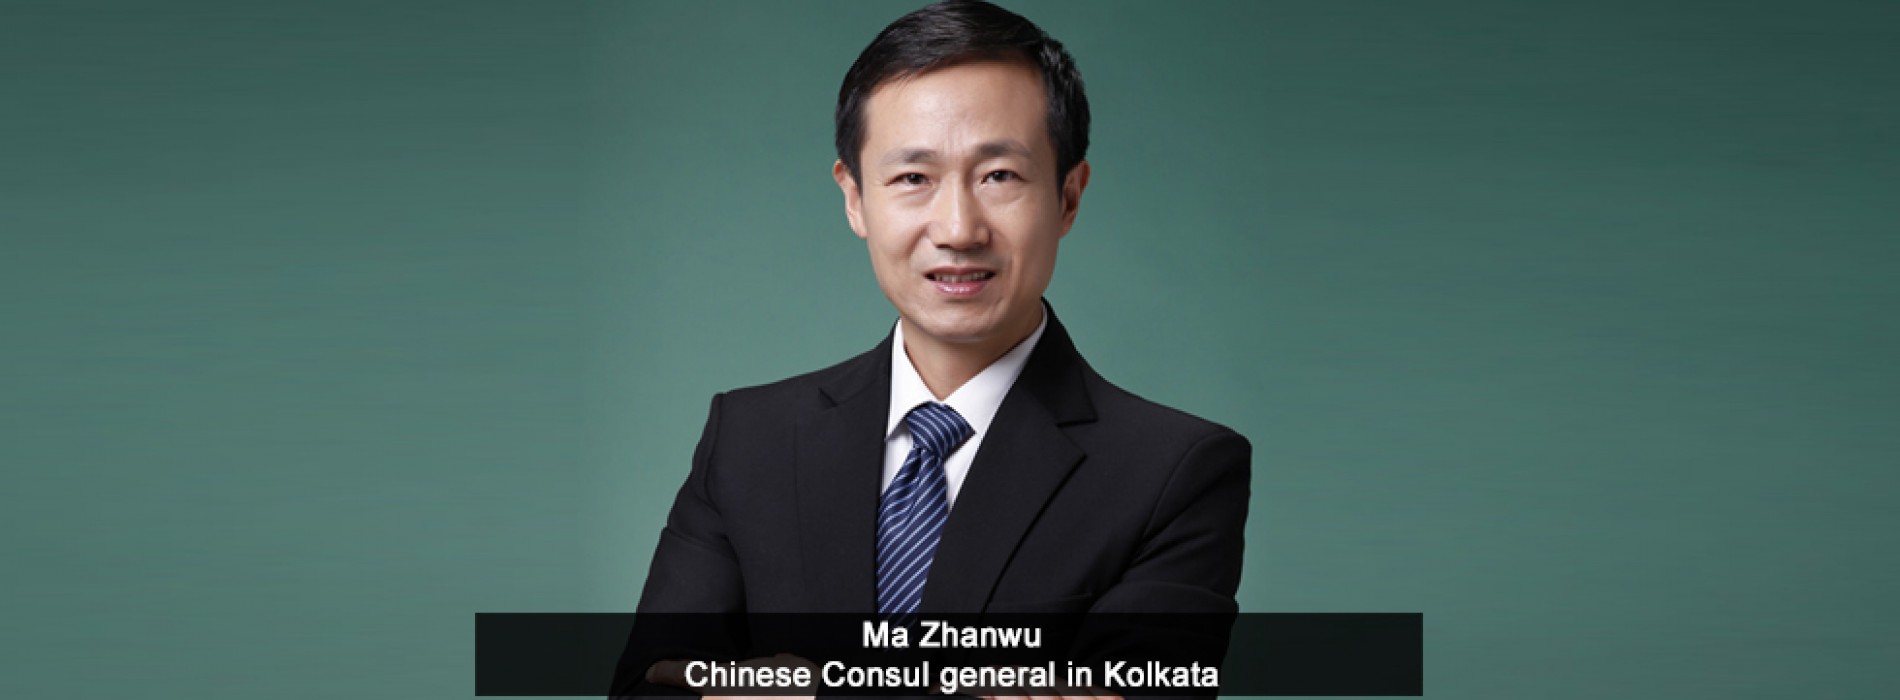 There should be more exchanges between Chinese and Indian citizens: Ma Zhanwu